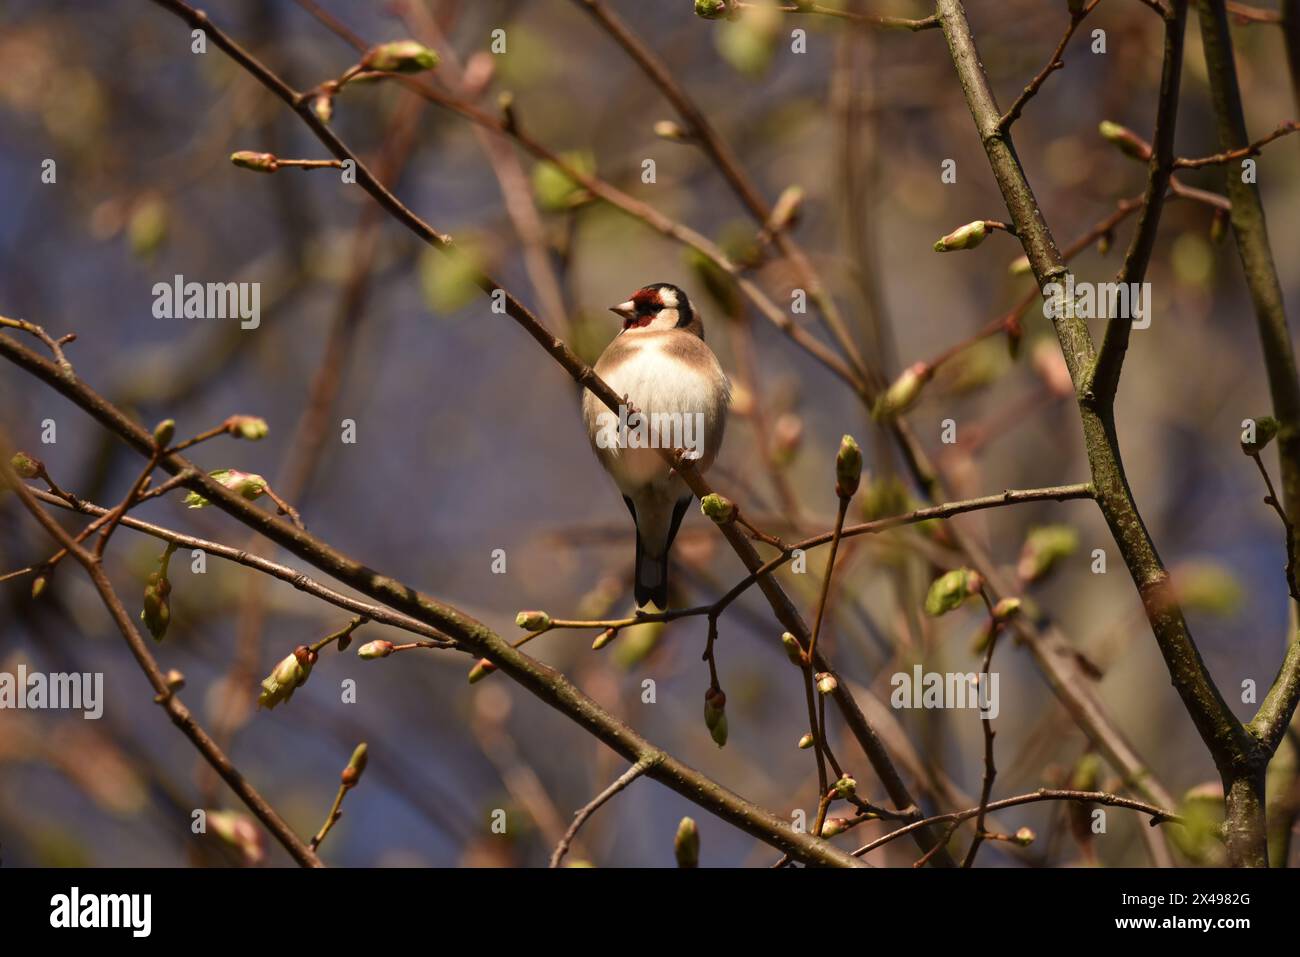 Close-Up Image of a European Goldfinch (Carduelis carduelis) Perched Facing Camera, Head Turned to Left, From Spring Budding Branches, Late Afternoon Stock Photo